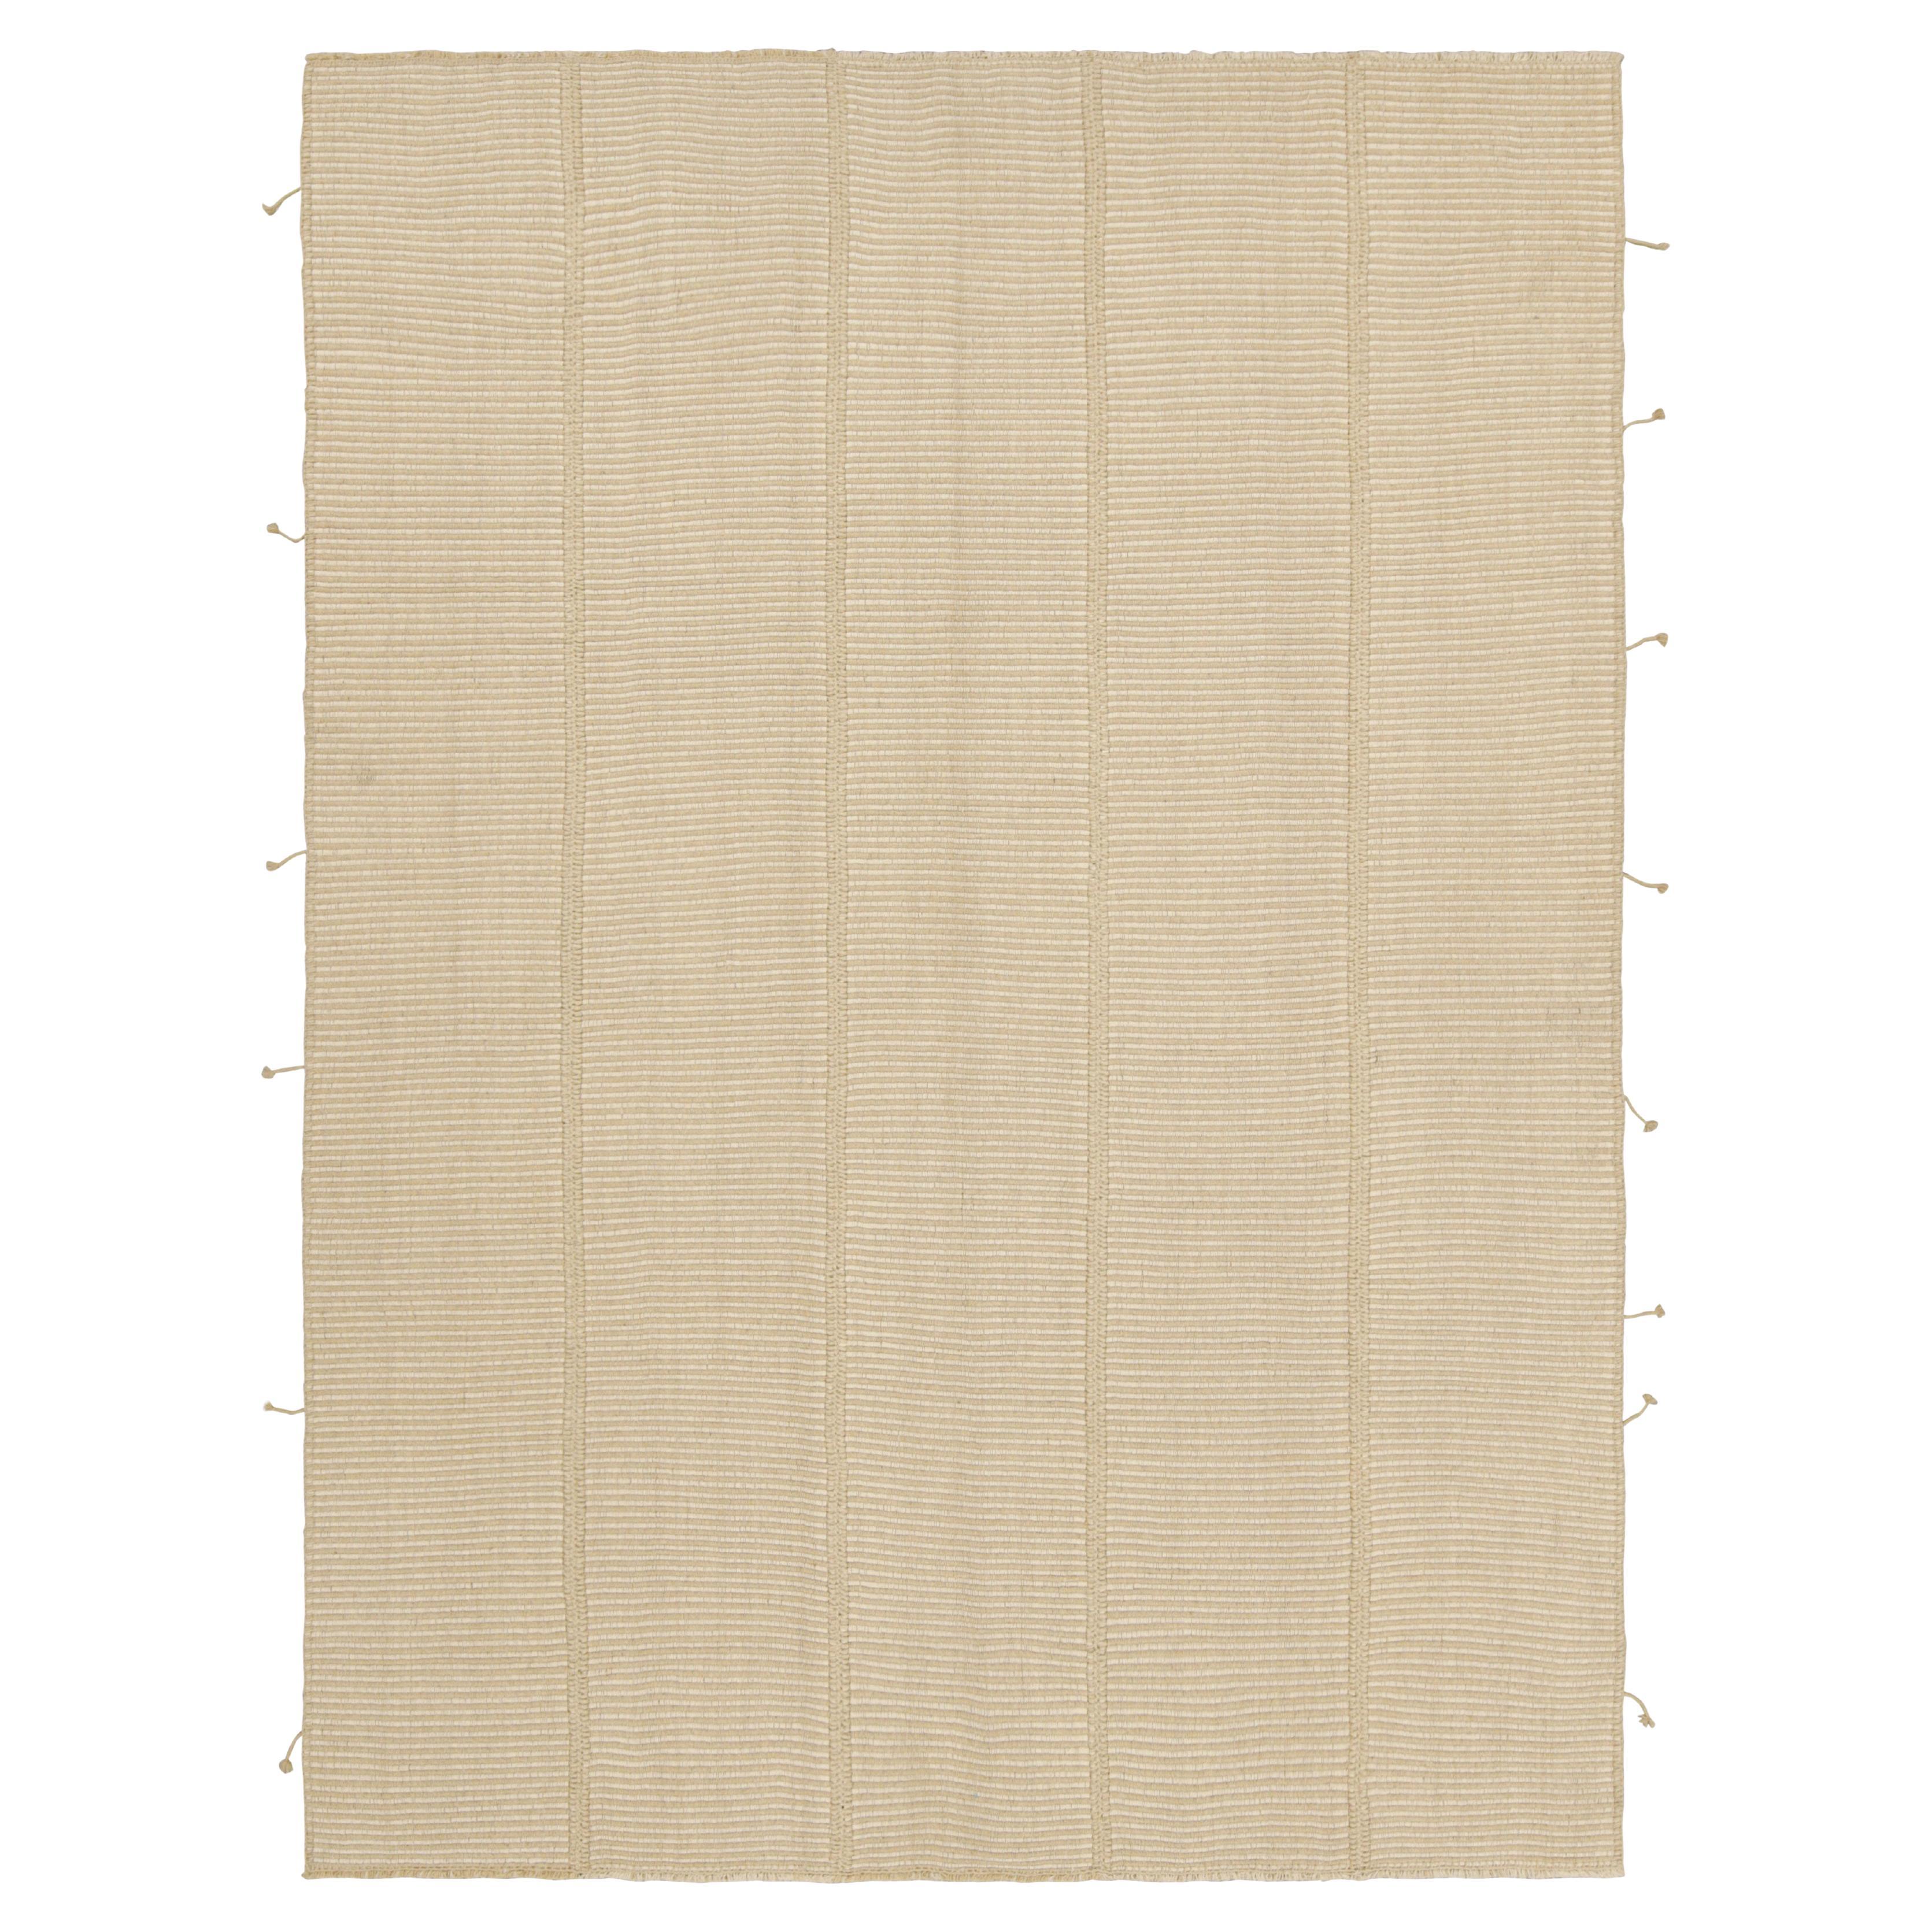 Rug & Kilim’s Contemporary Kilim in Cream White and Beige Textural Stripes For Sale